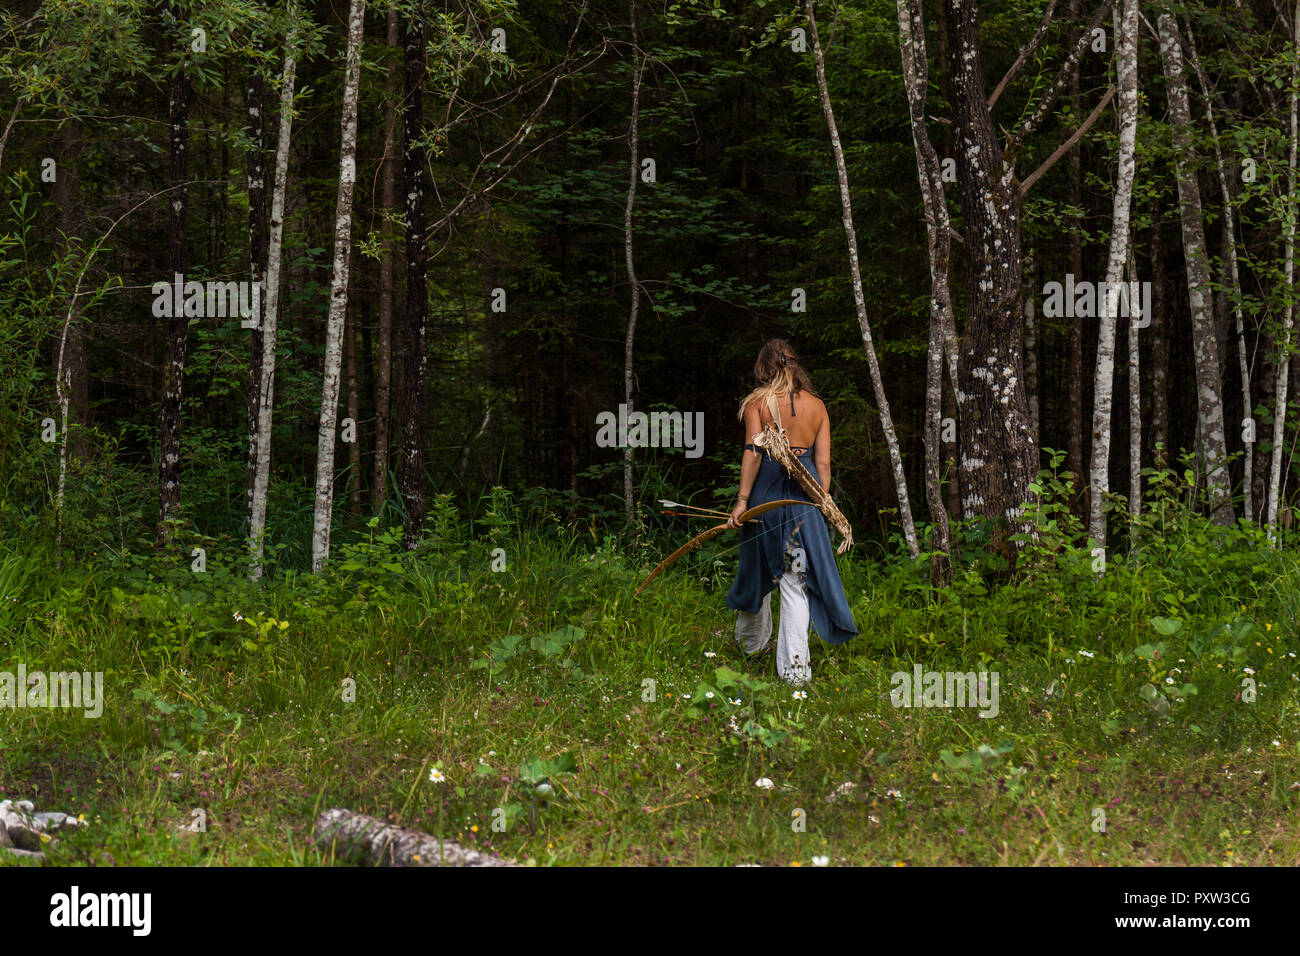 Rear view of woman walking in a forest with bow and arrow Stock Photo